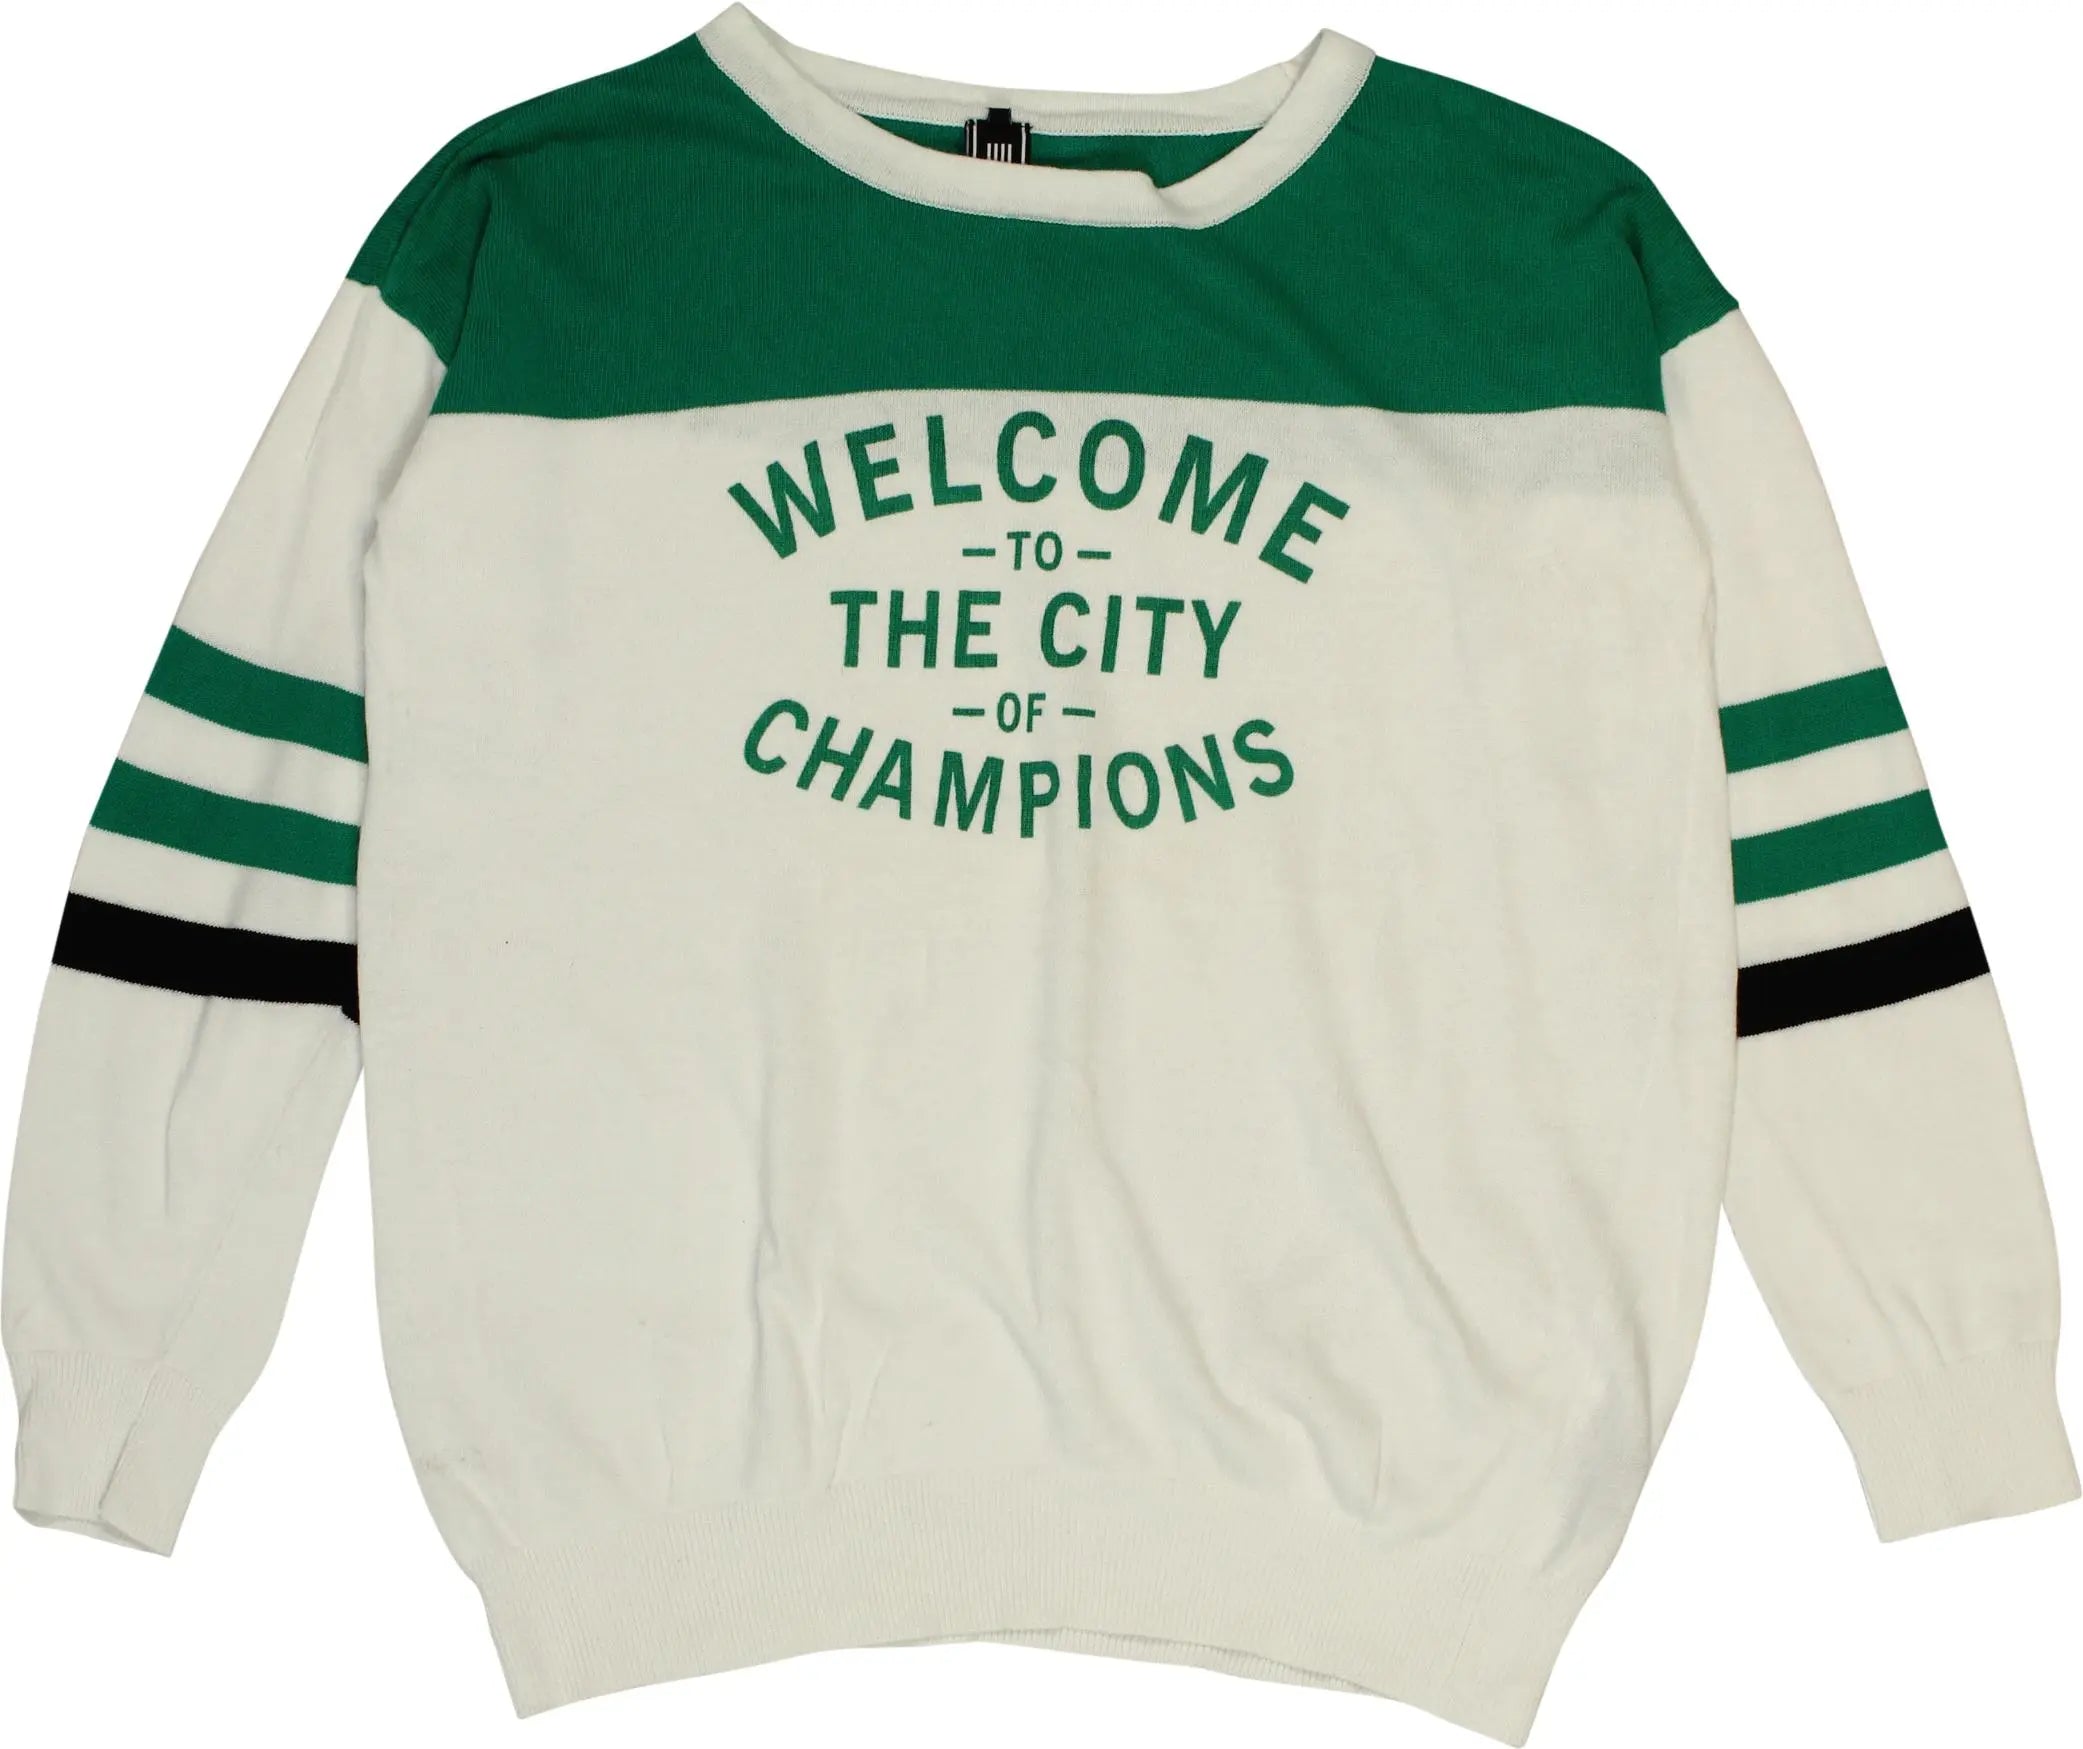 The Sting - The City of Champions Jumper- ThriftTale.com - Vintage and second handclothing